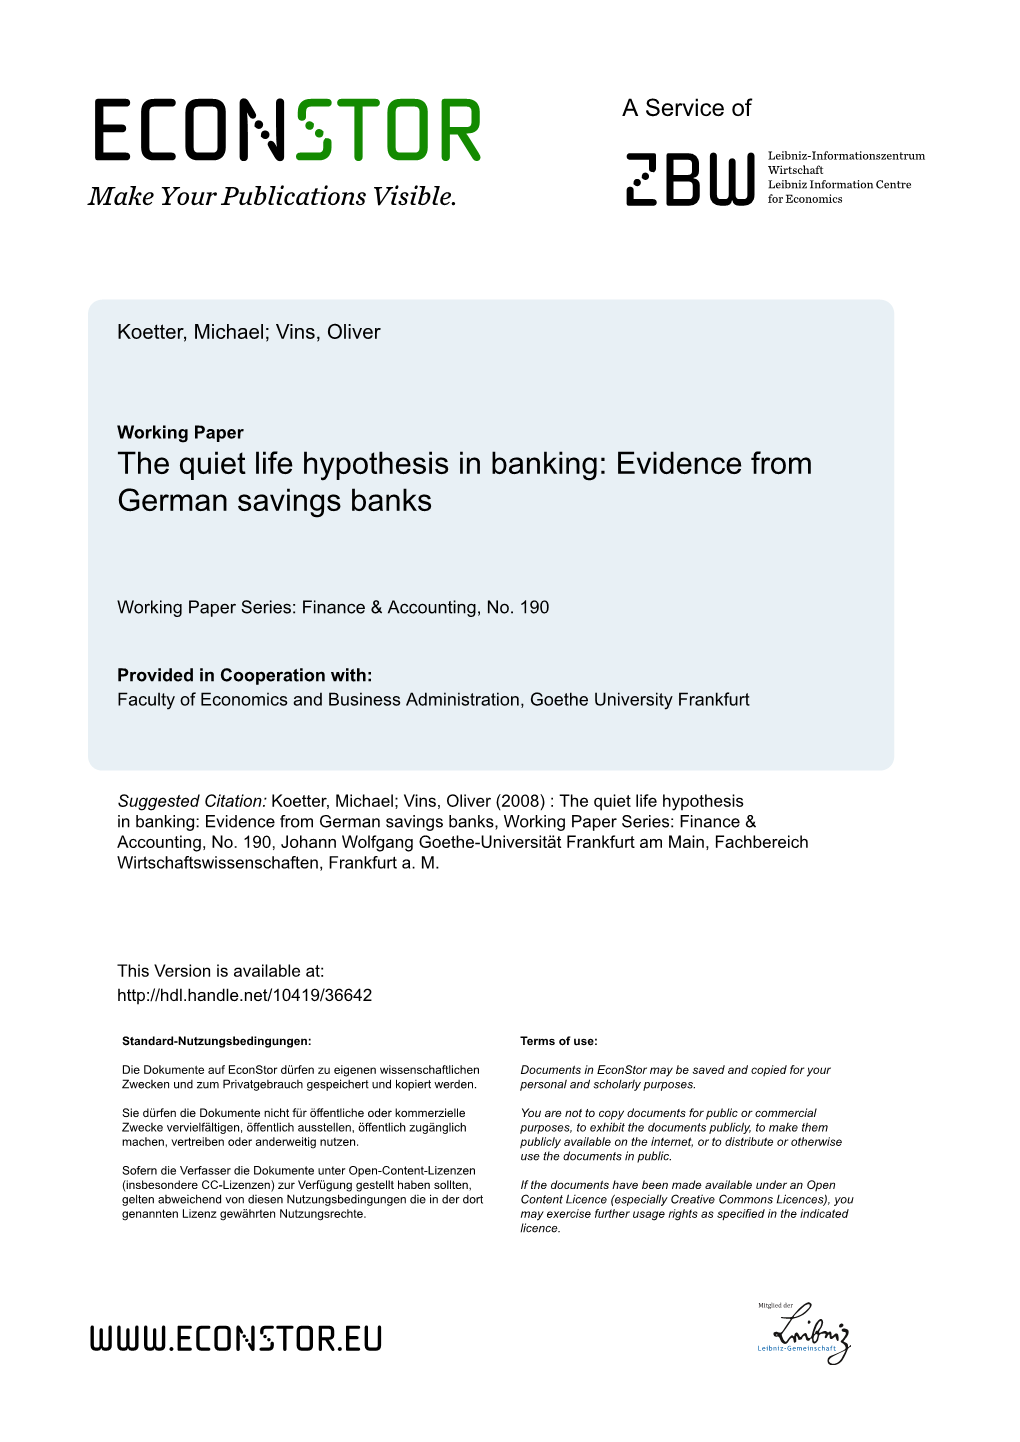 The Quiet Life Hypothesis in Banking: Evidence from German Savings Banks